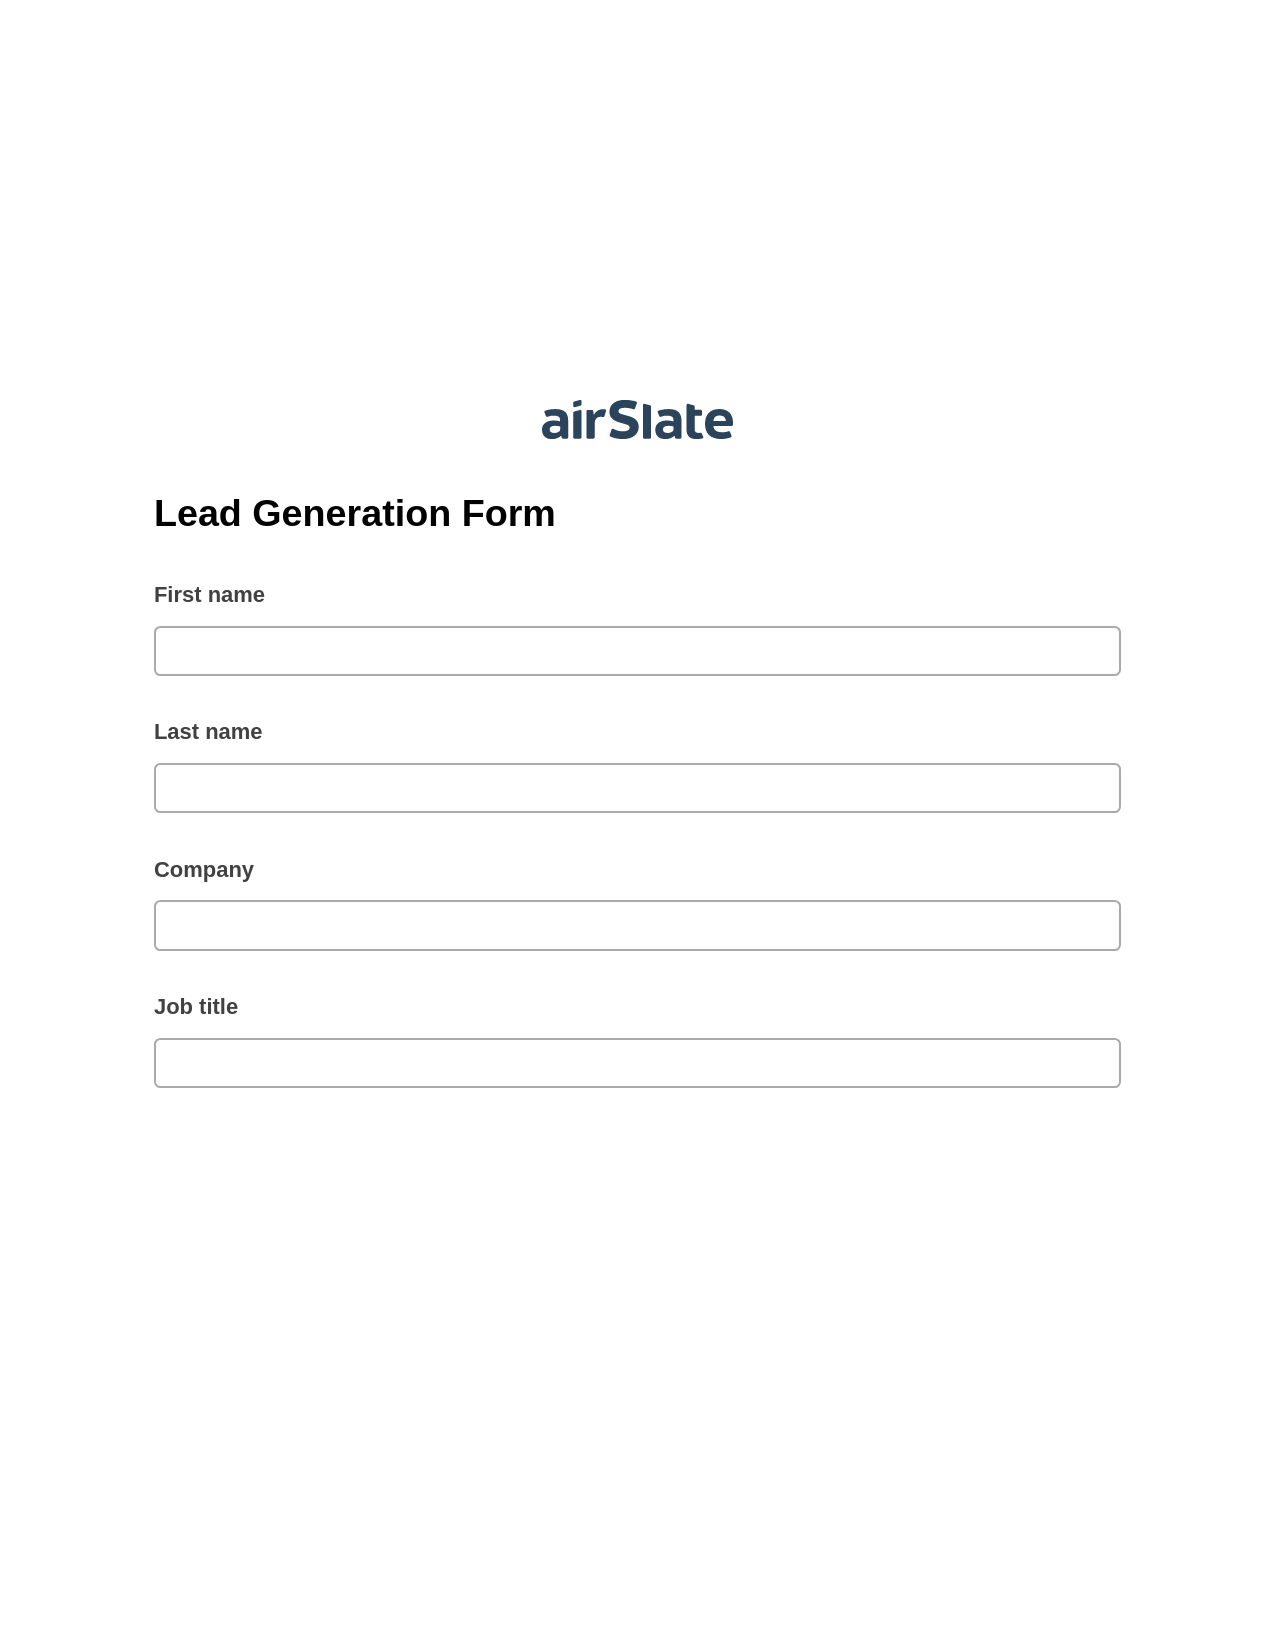 Multirole Lead Generation Form Pre-fill from Salesforce Records with SOQL Bot, Remove Tags From Slate Bot, Post-finish Document Bot